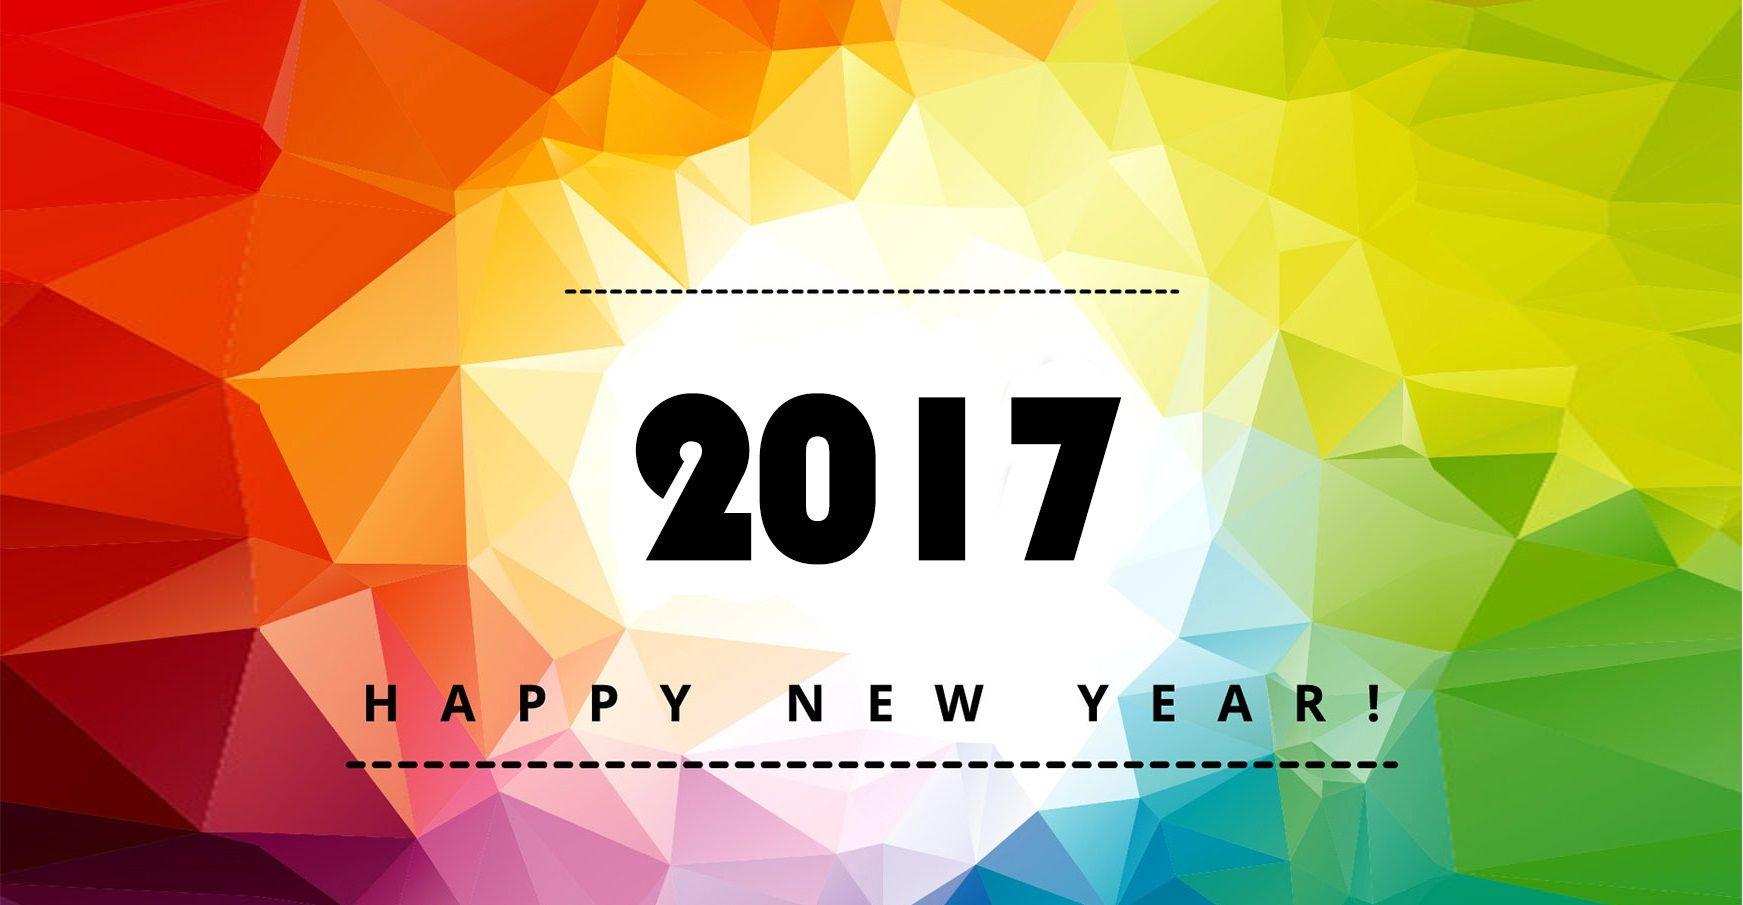 Happy New Year Image for Whatsapp DP, Profile Wallpaper 2017